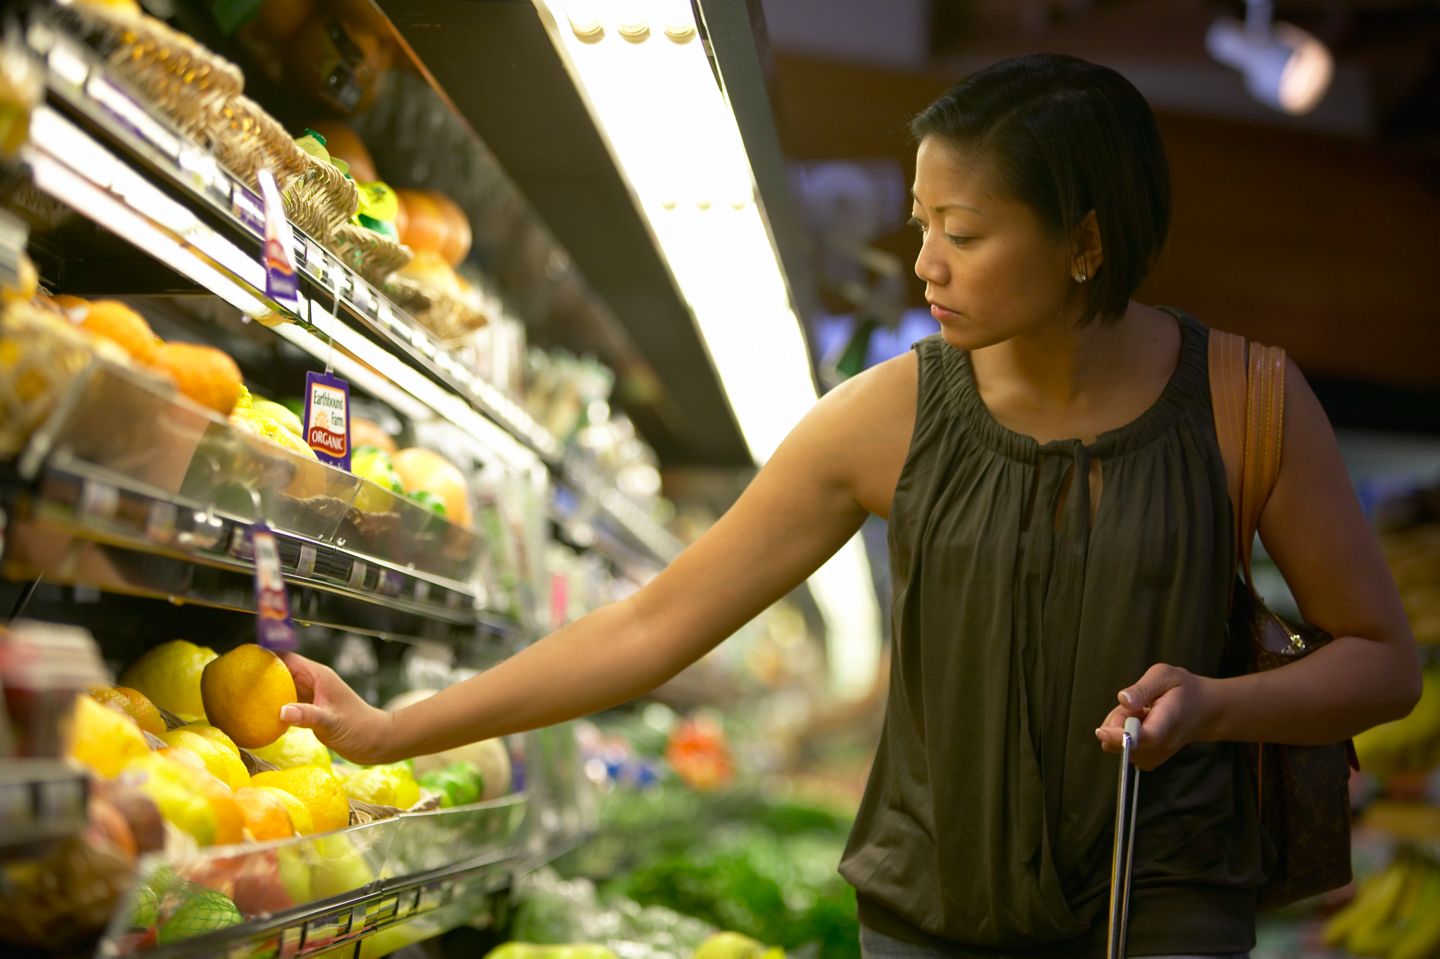 A lady selecting produce at a grocery store